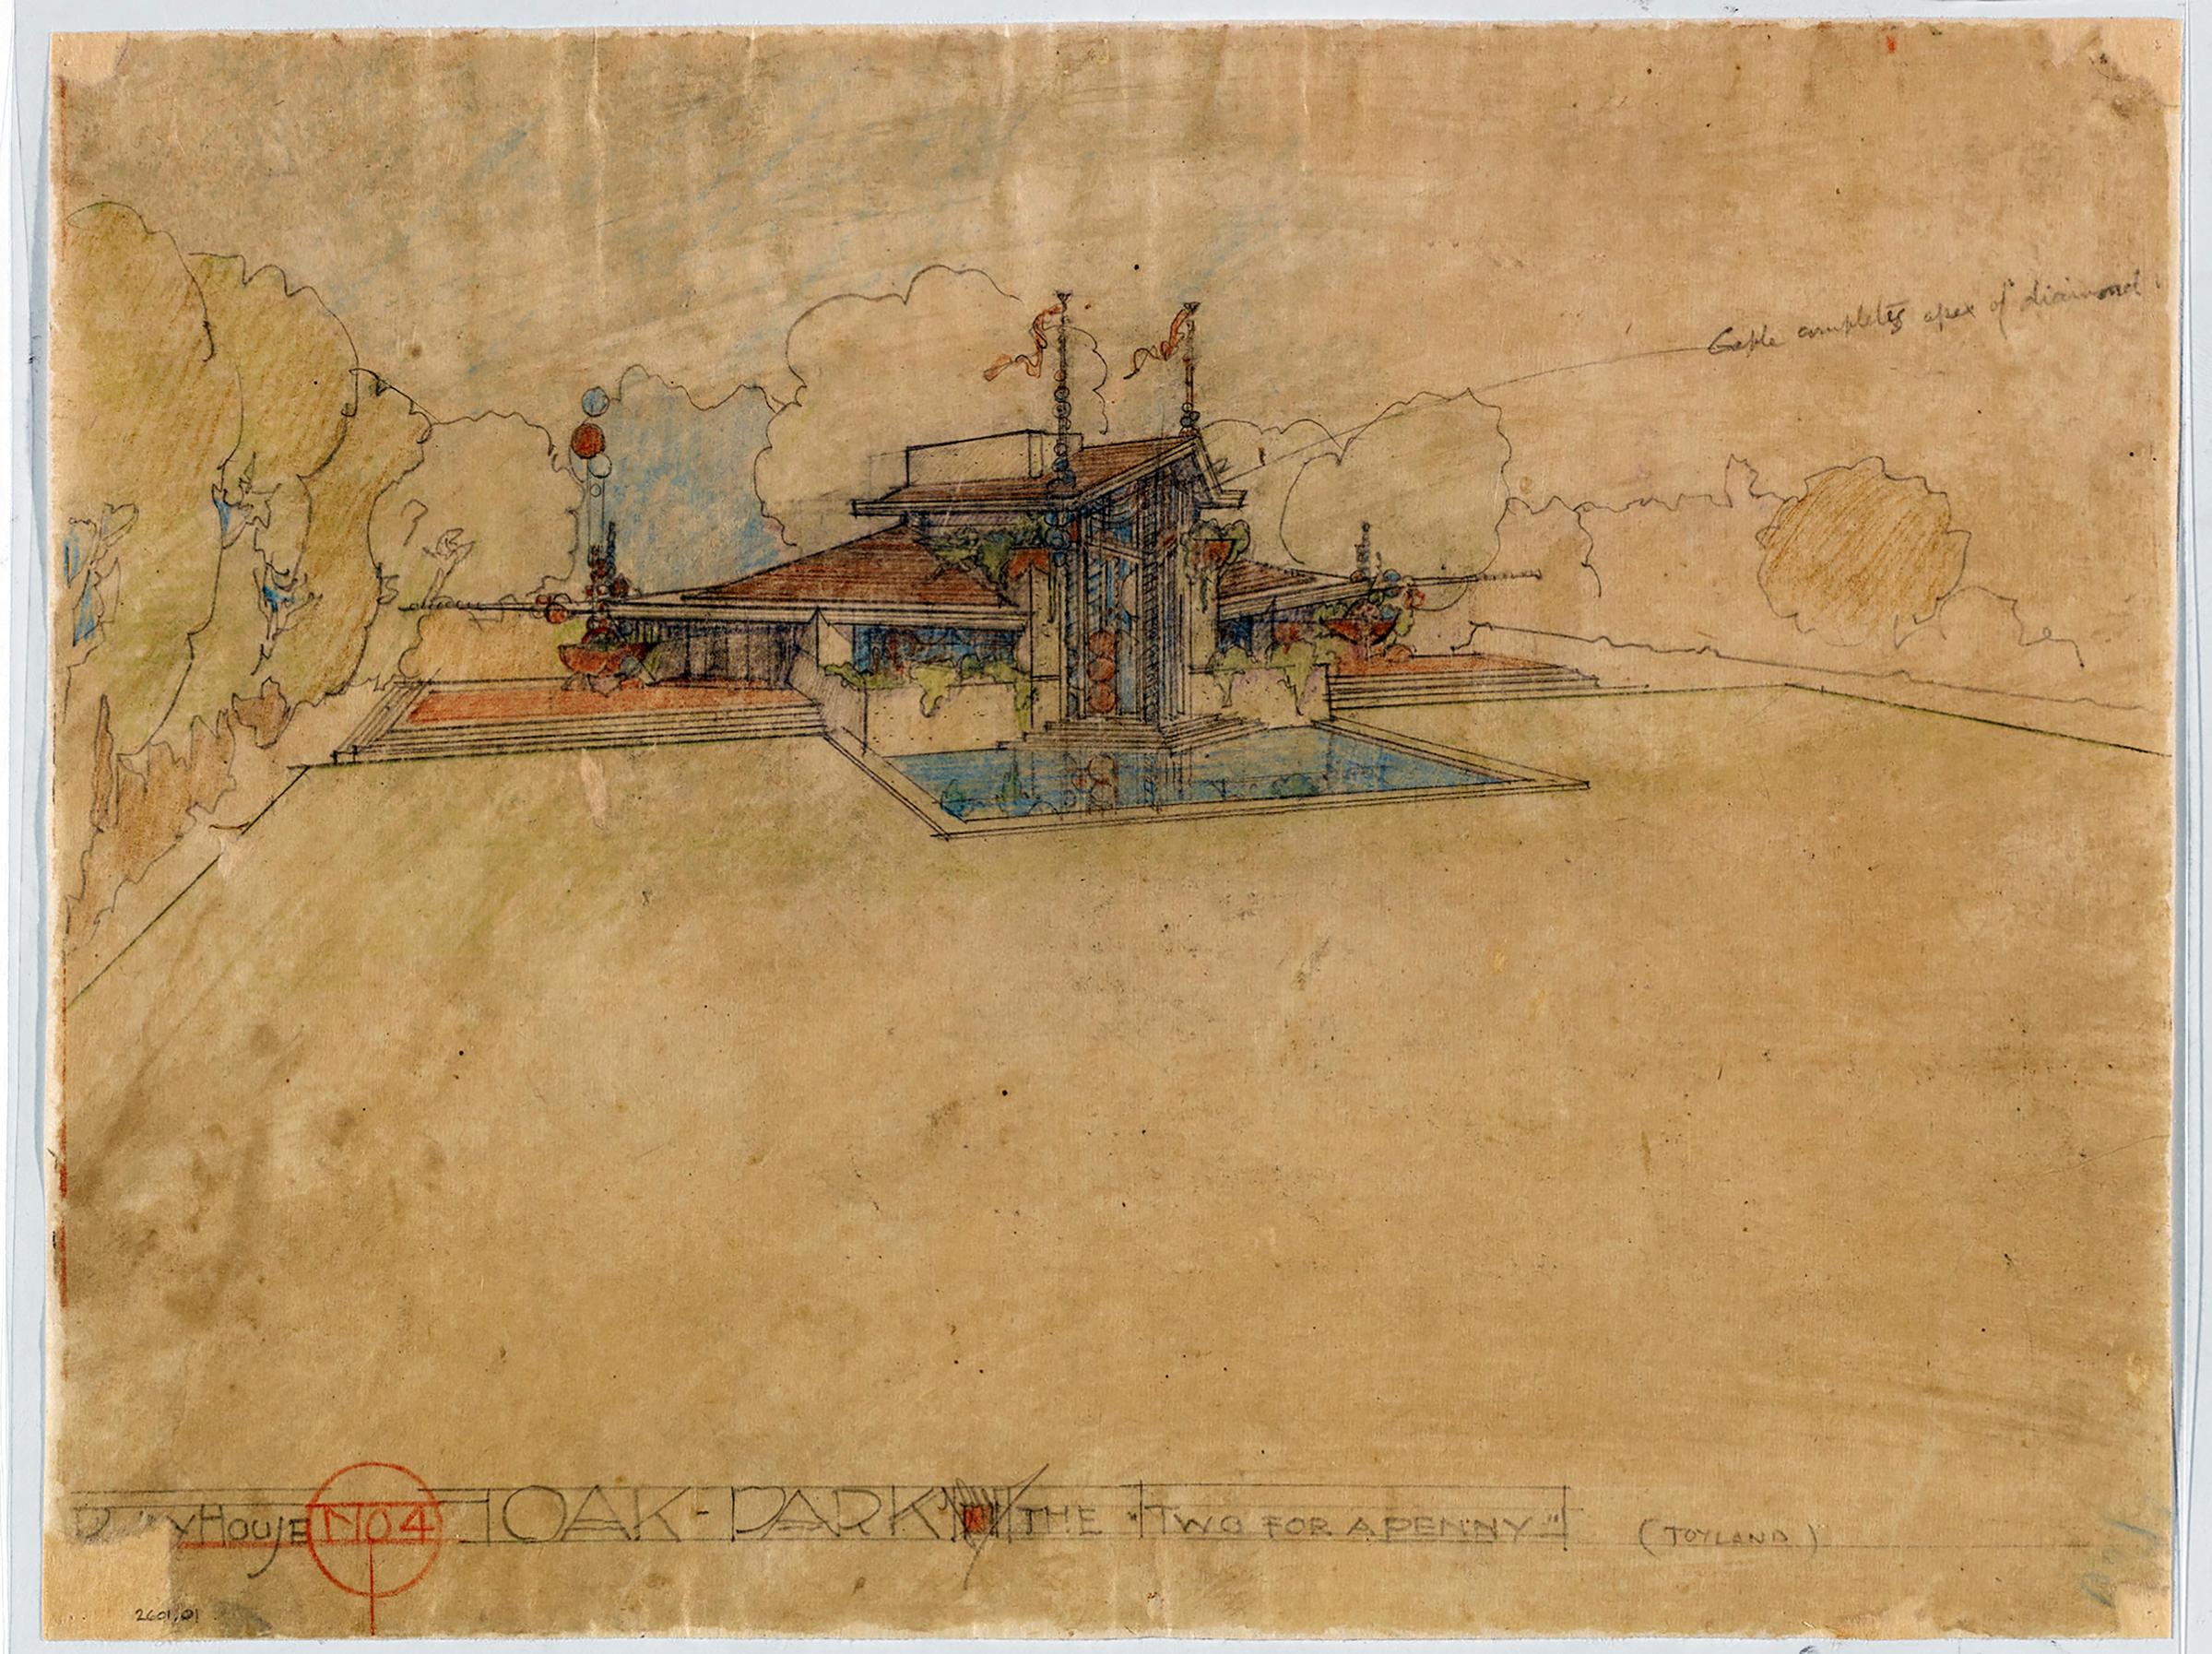 Frank Lloyd Wright drawing from the Museum of Modern Art exhibition.